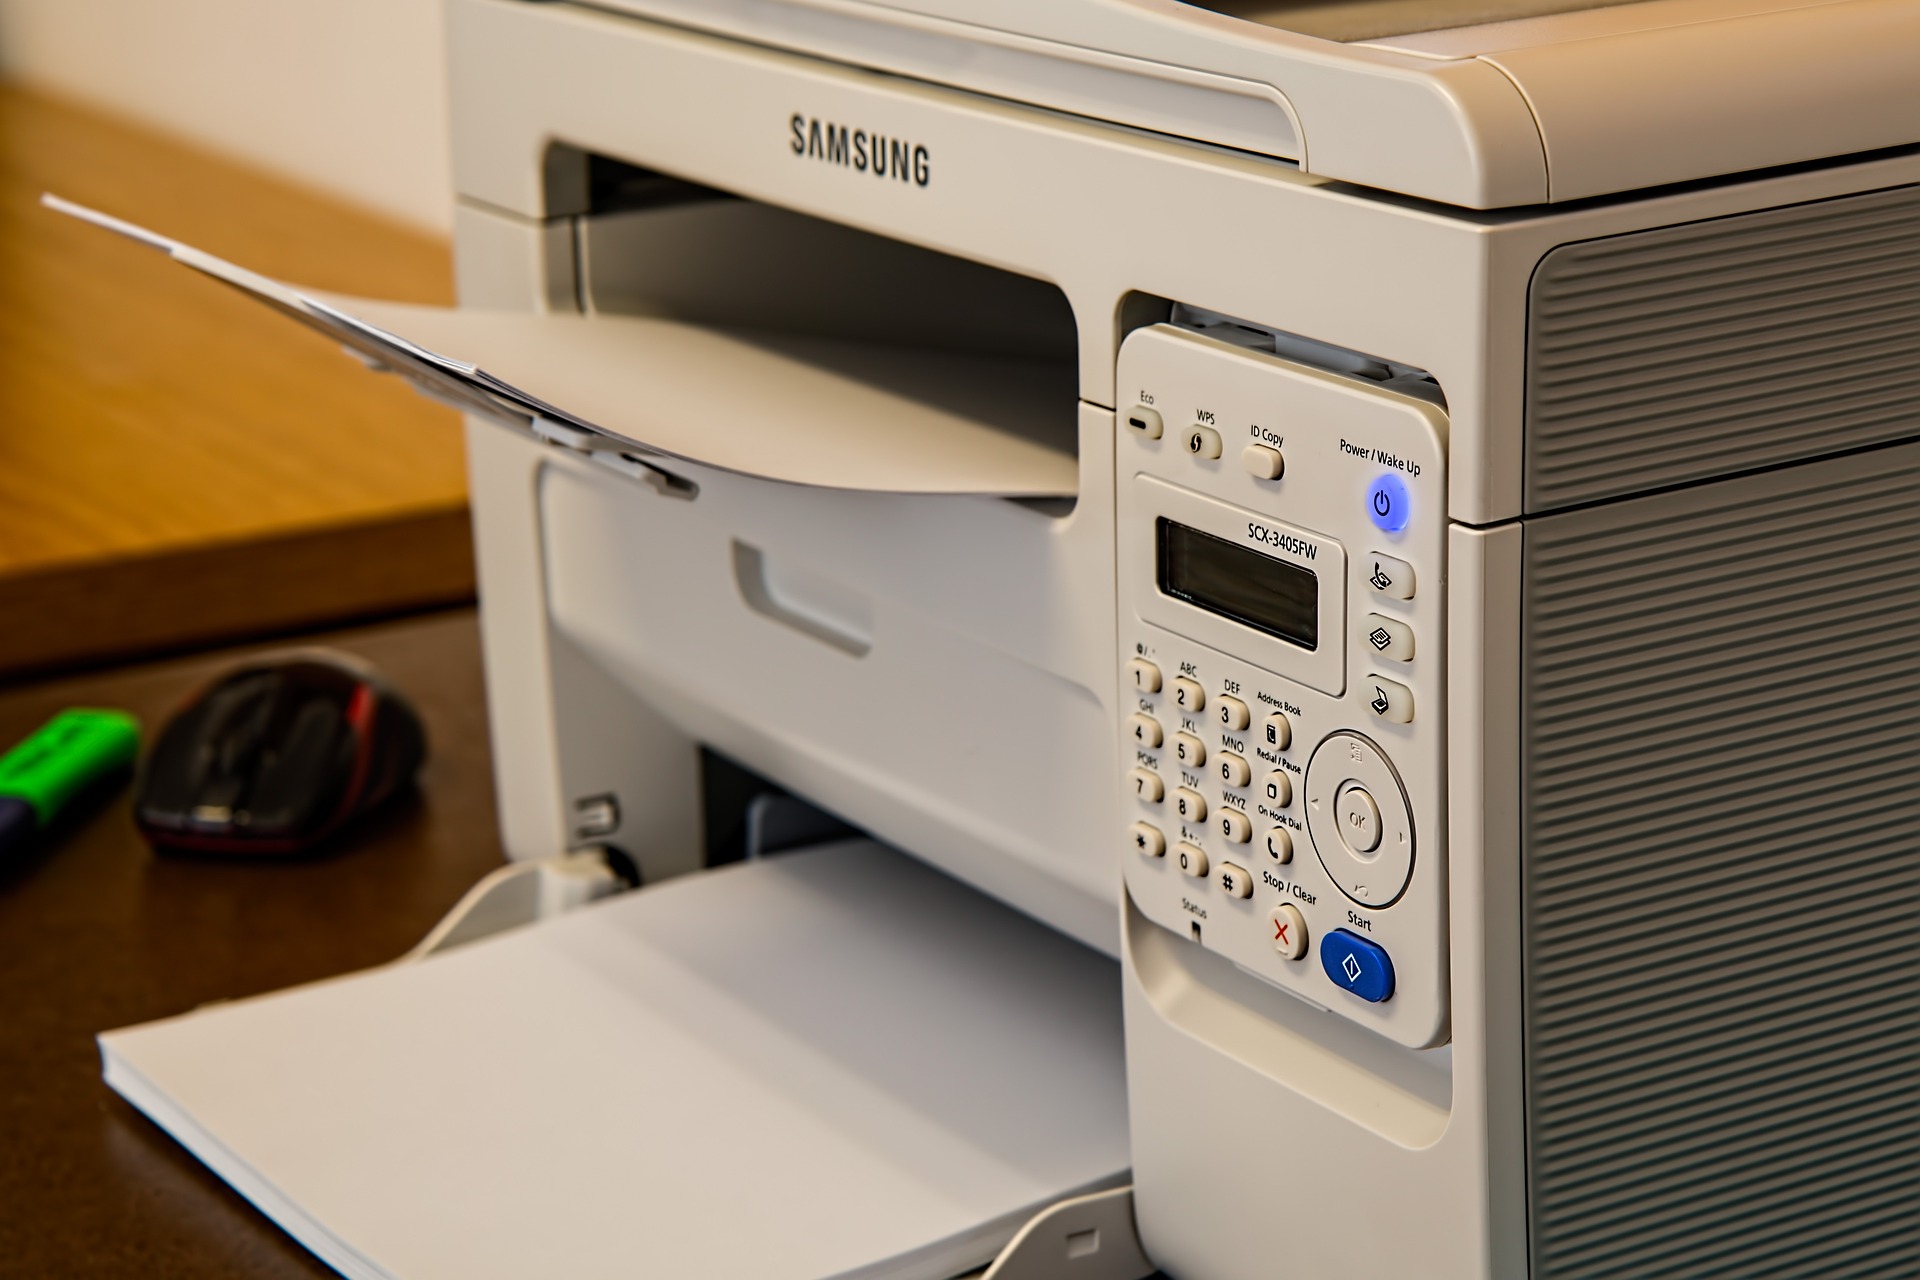 Troubleshooting Tips for Common Fax Problems